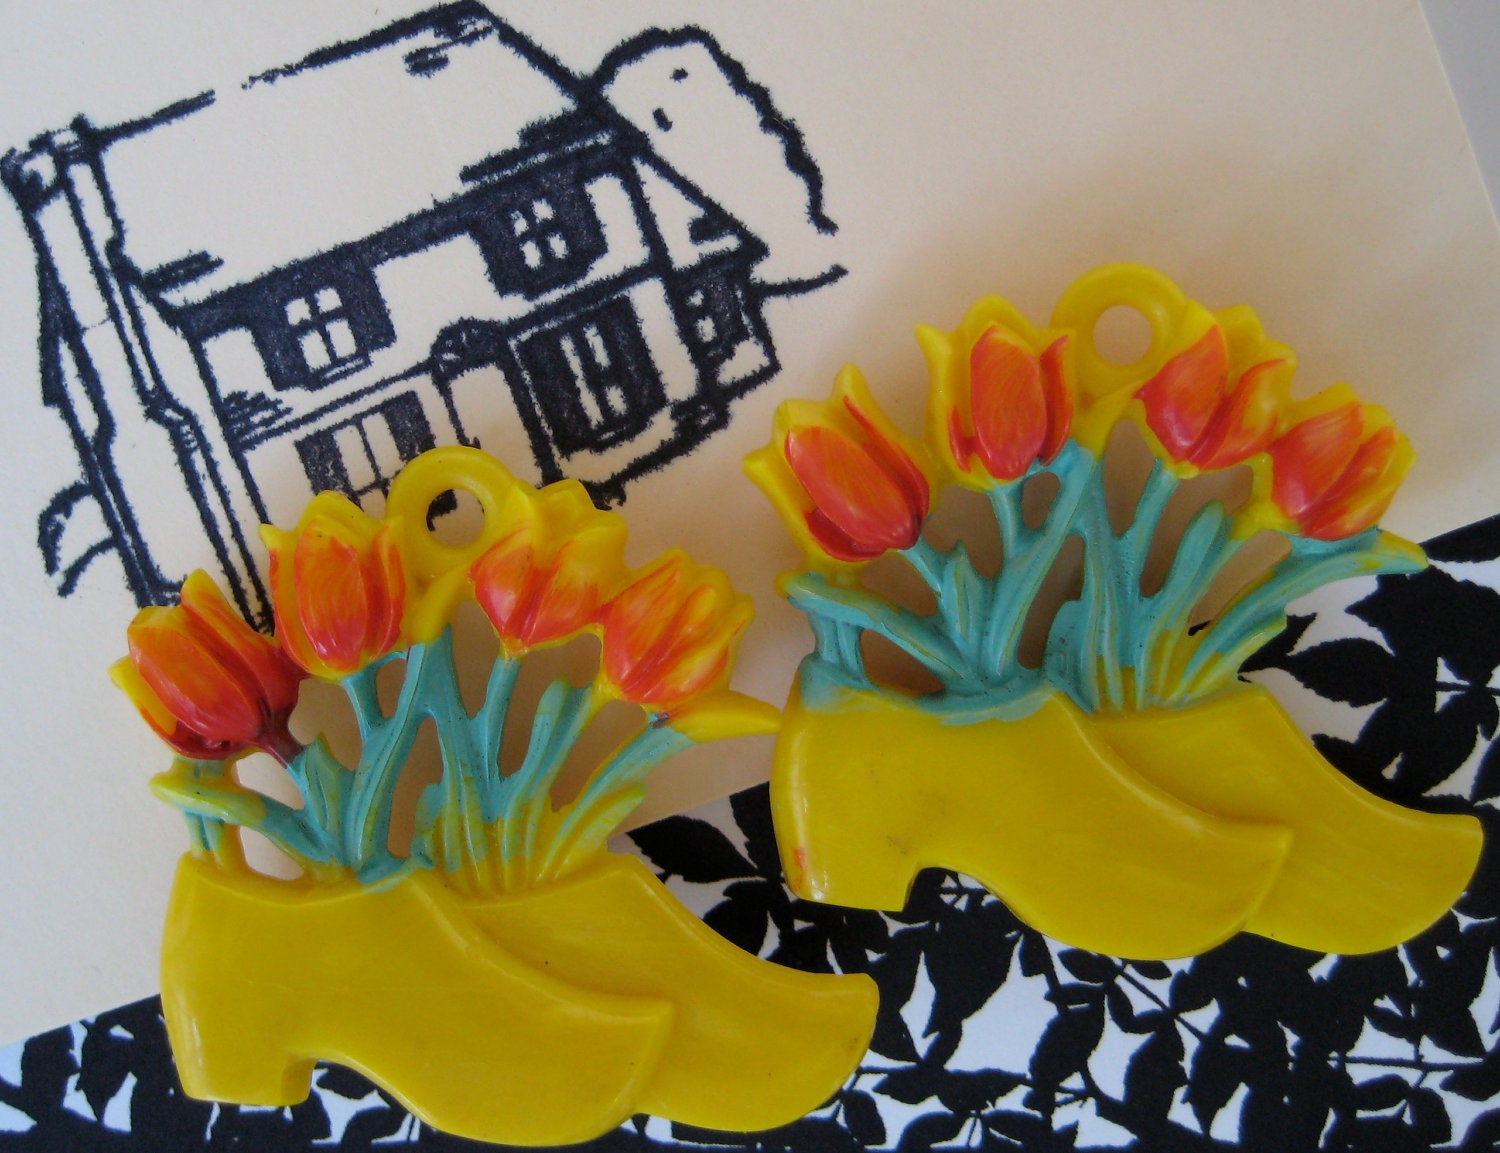 vintage pair of lucite dutch shoe push pin curtain tie backs with sprouting tulips - zuzuandolive